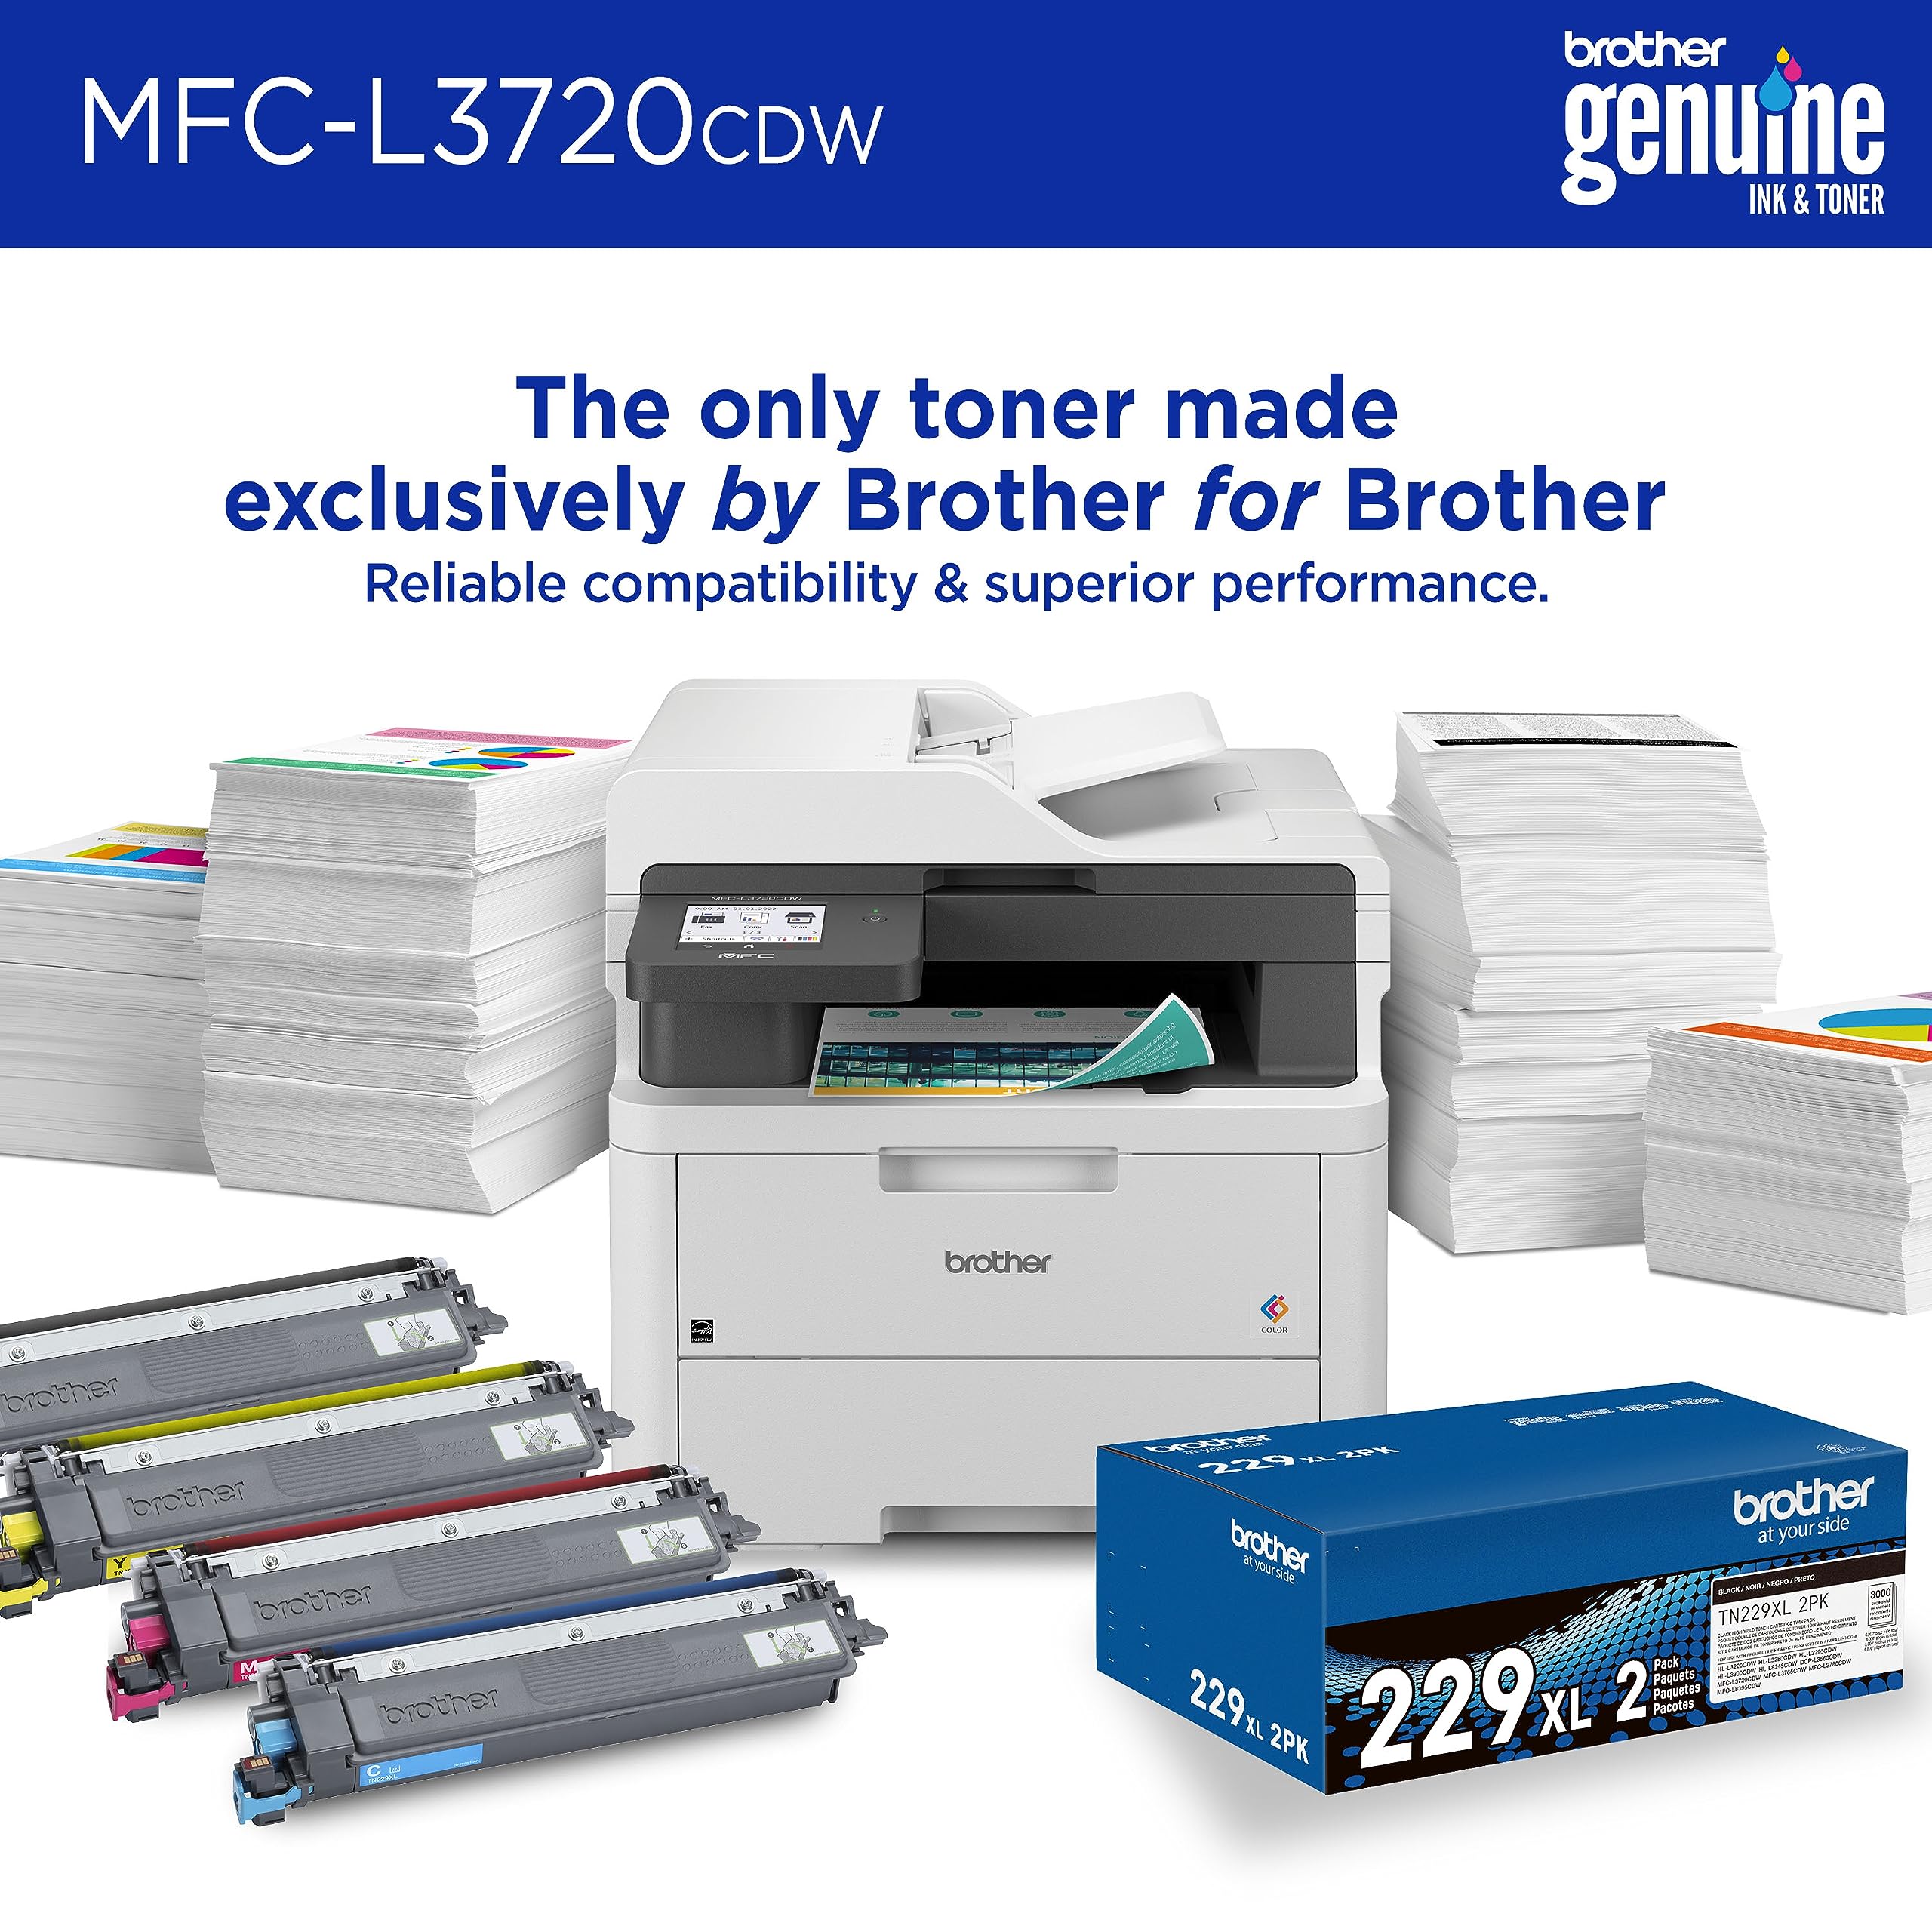 Brother MFC-L3780CDW Wireless Digital Color All-in-One Printer with Laser Quality Output, Single Pass Duplex Copy & Scan | Includes 4 Month Refresh Subscription Trial ¹ Amazon Dash Replenishment Ready